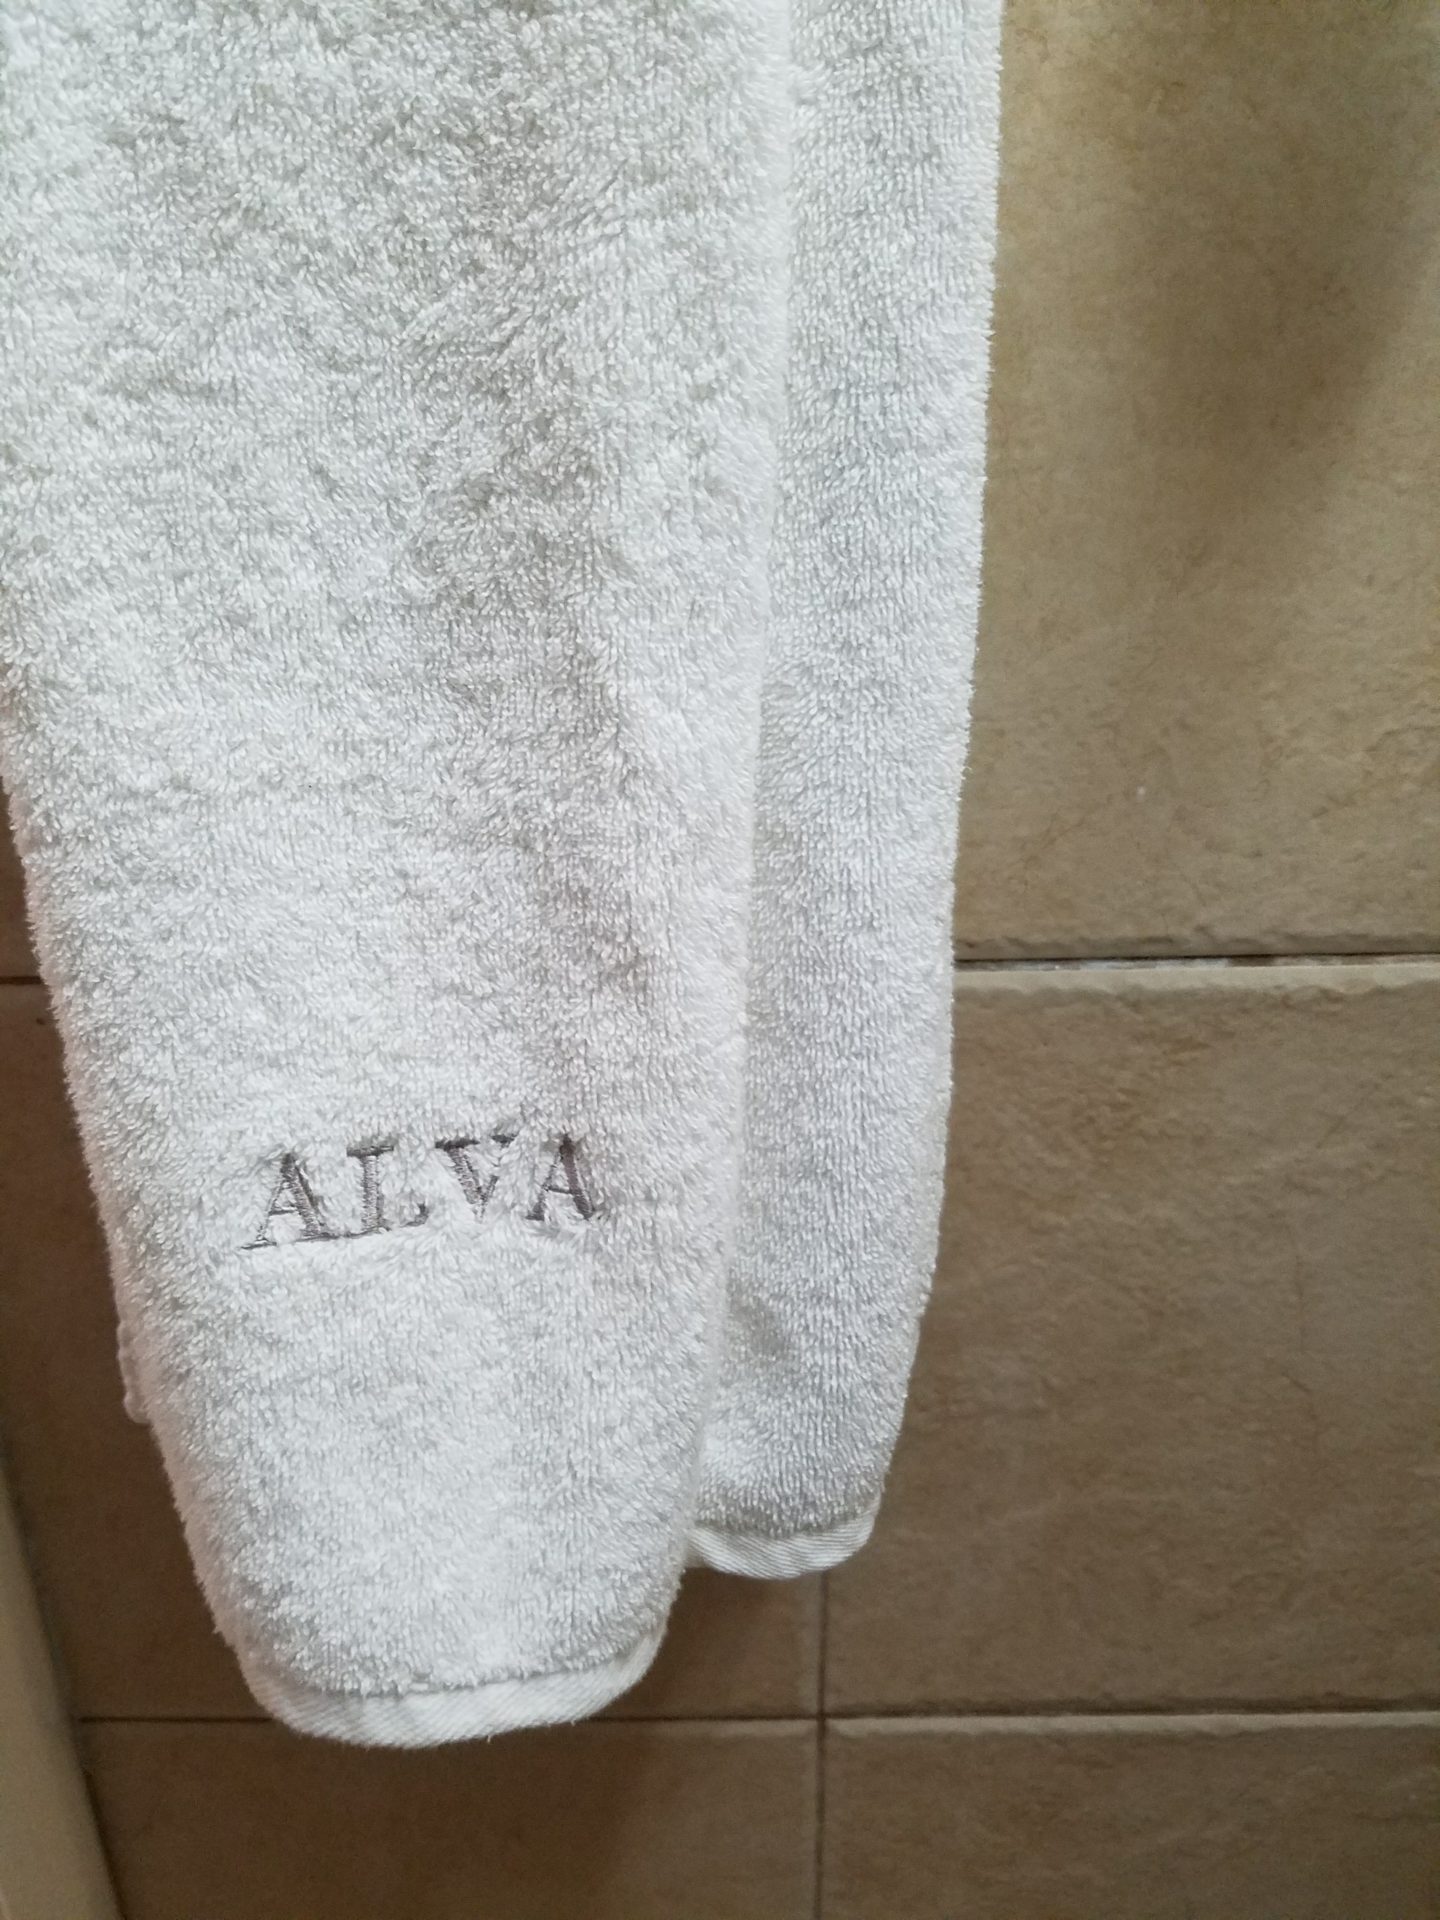 a white towel with a name on it